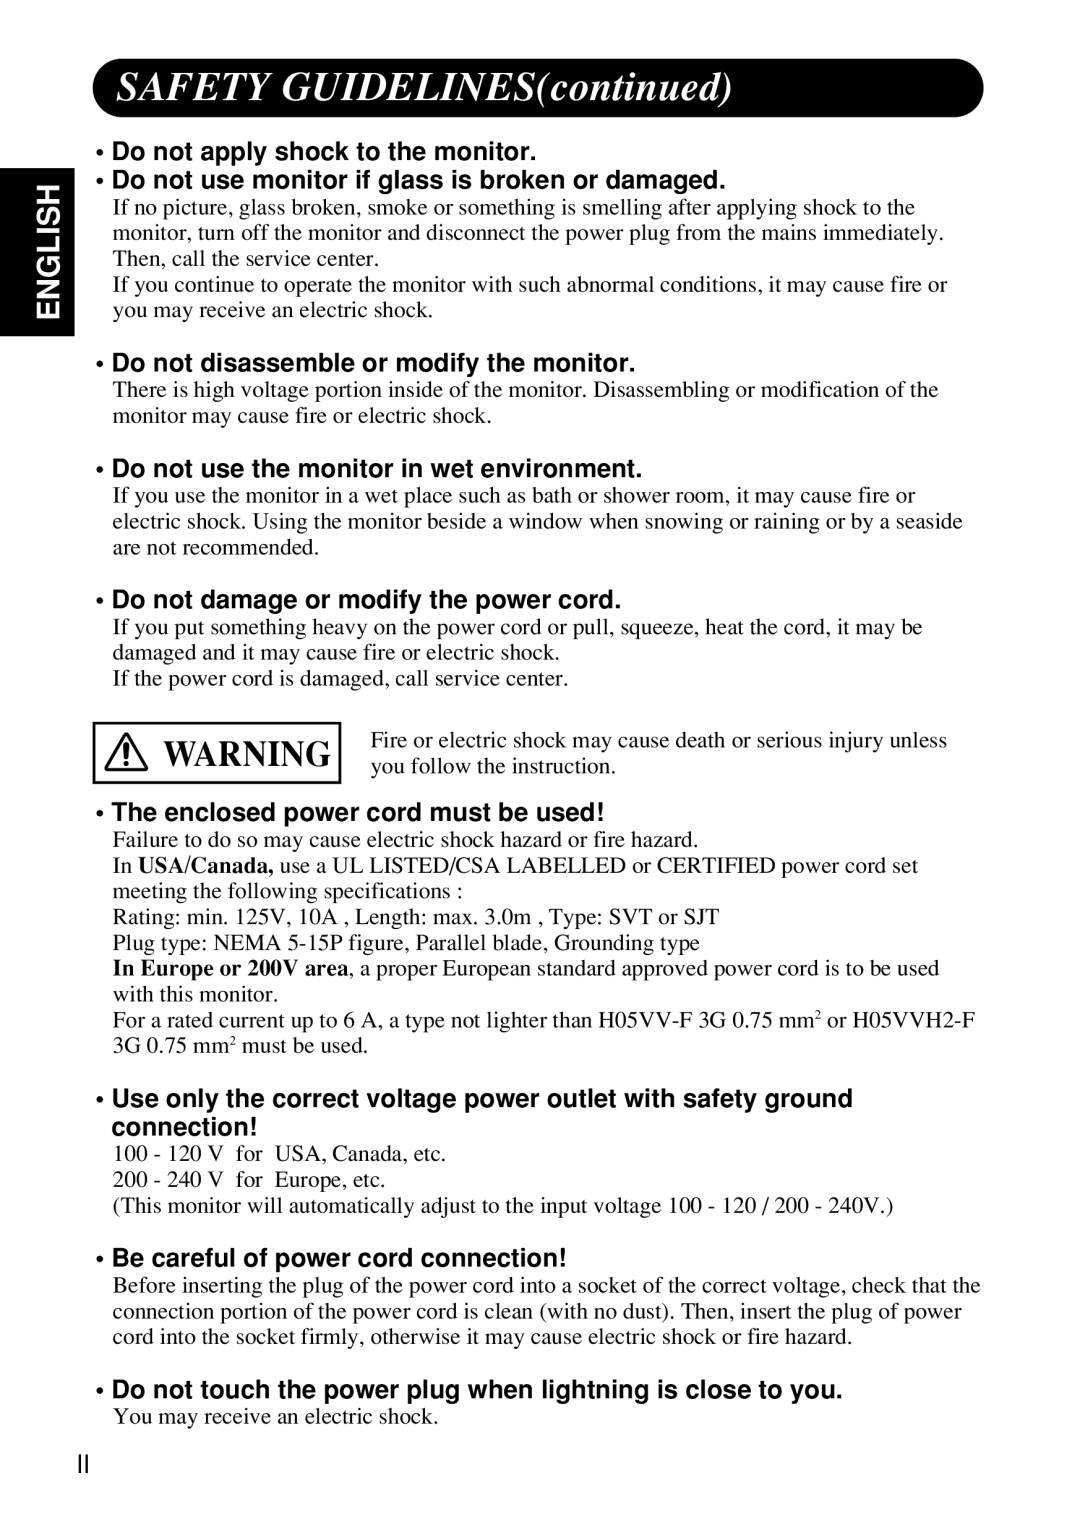 Hitachi Koki USA CMP4120HDUS user manual SAFETY GUIDELINEScontinued, Do not apply shock to the monitor, English 